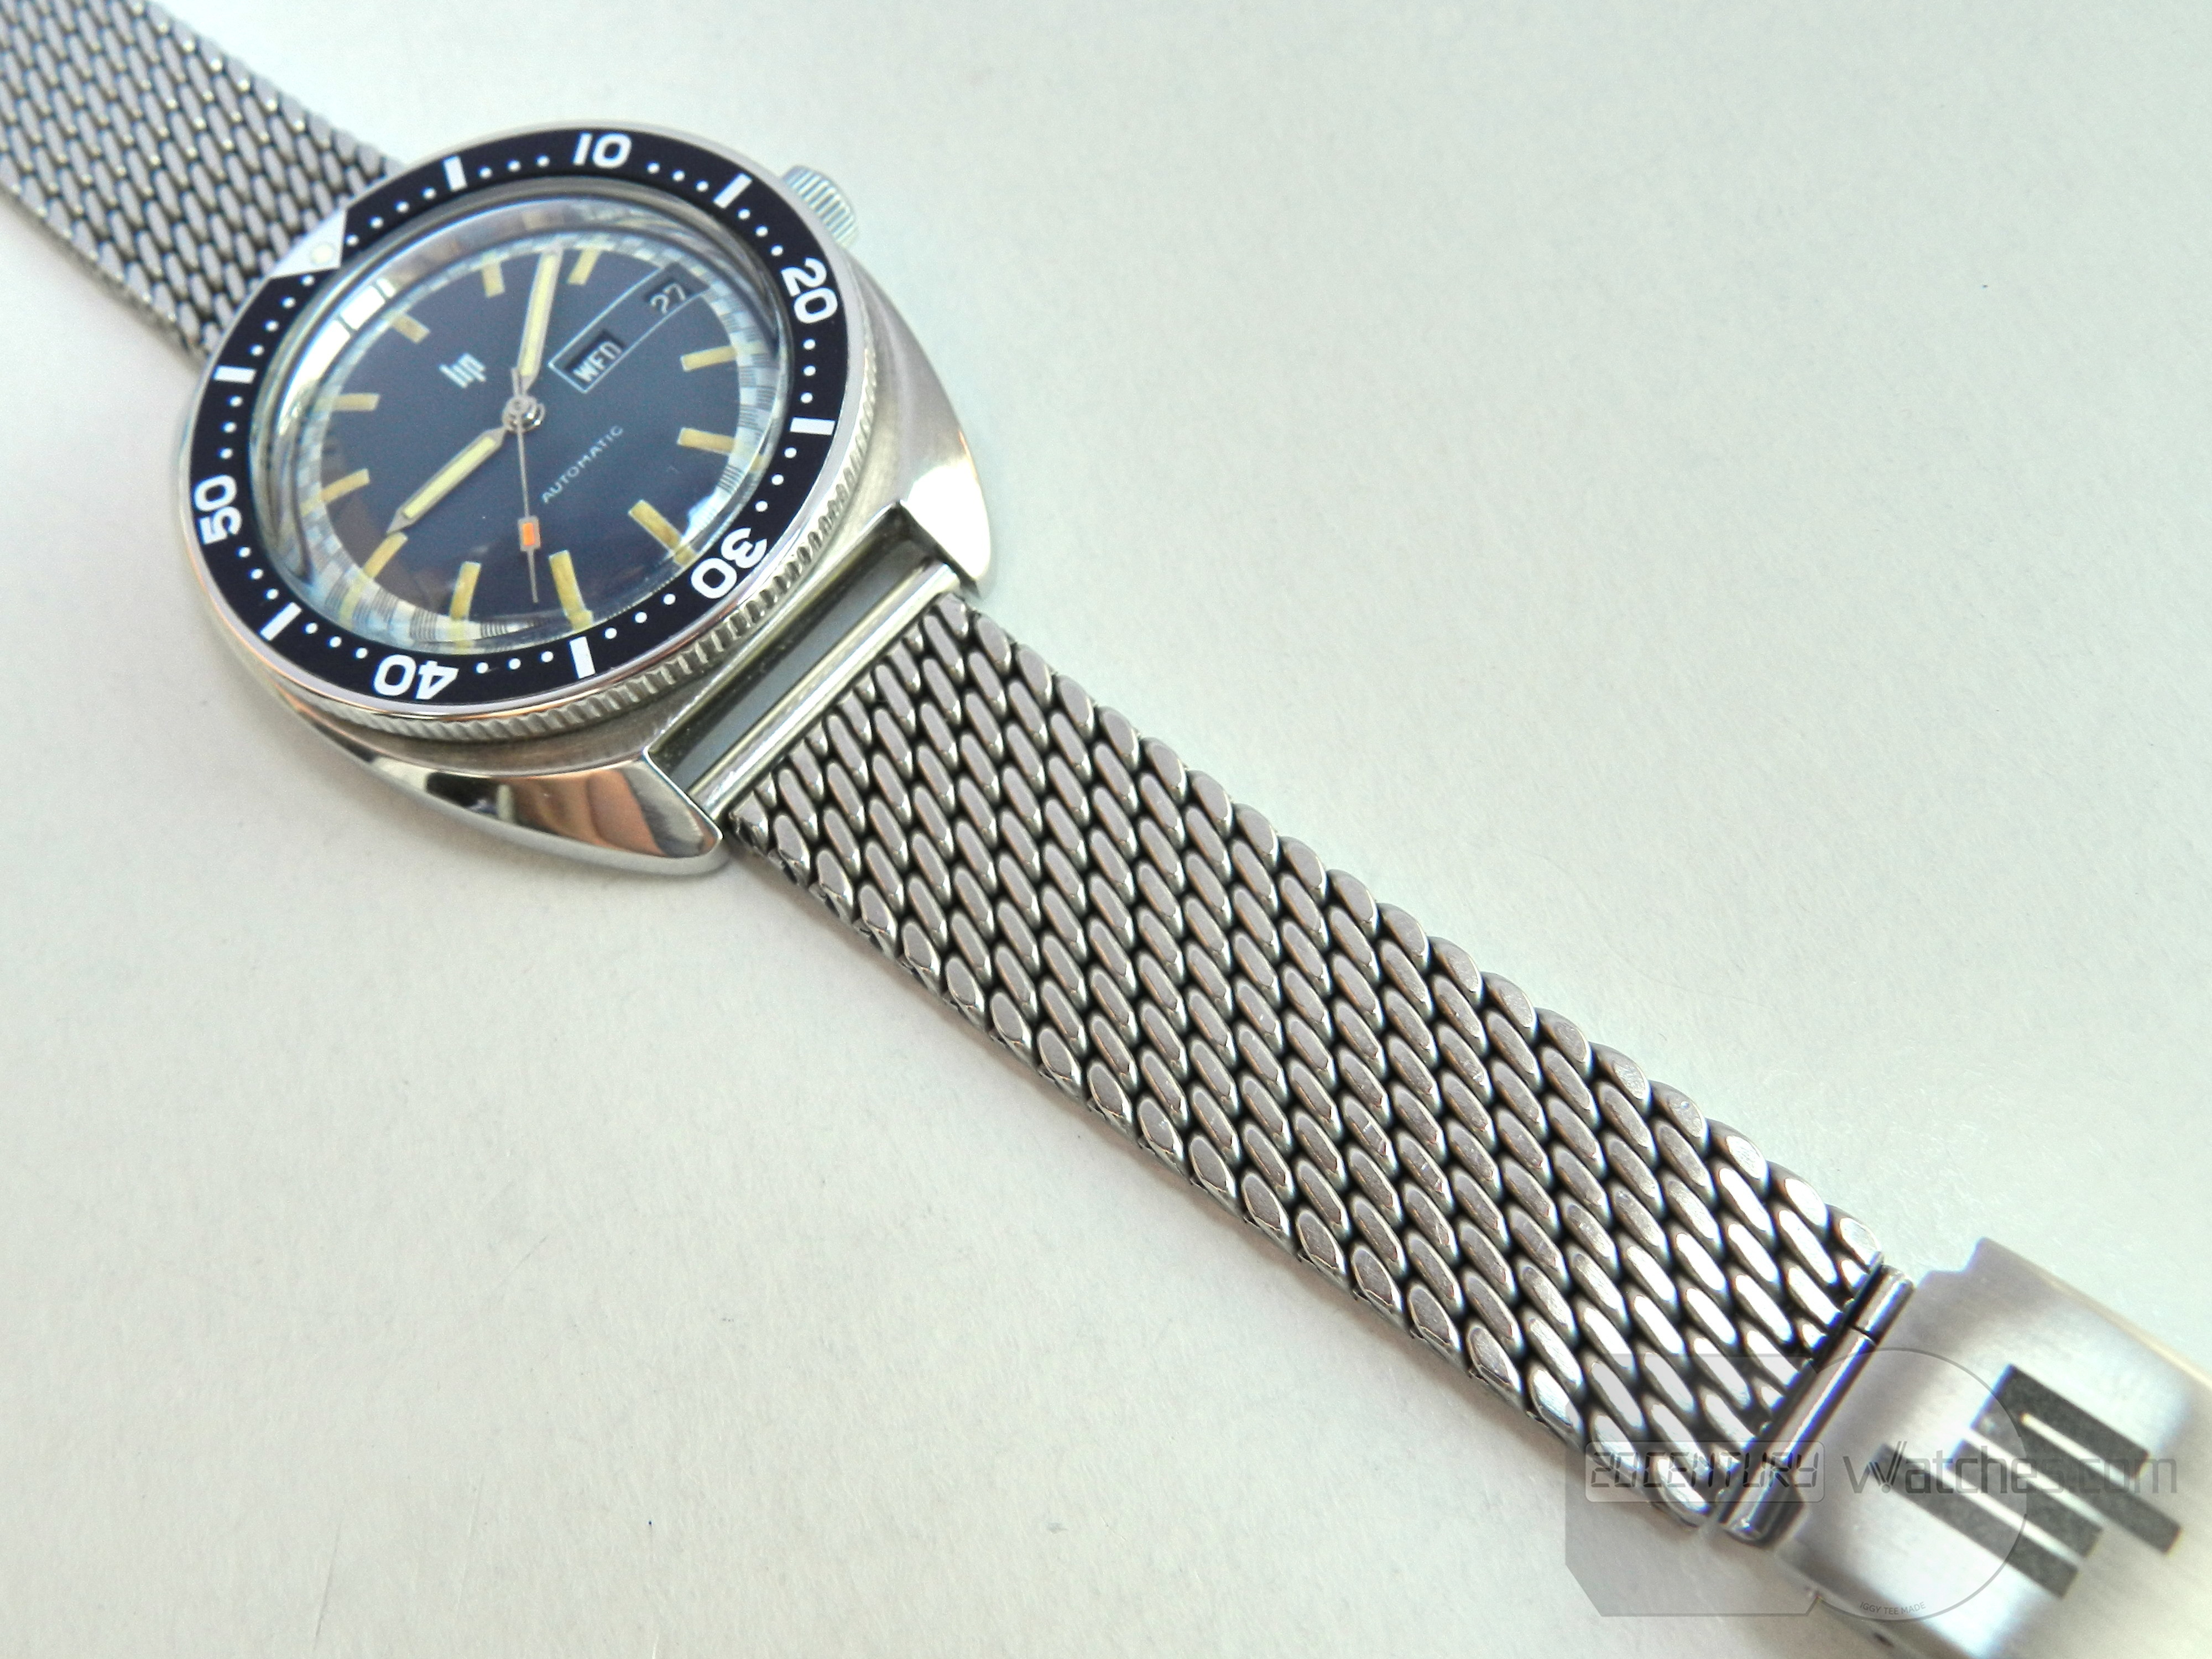 LIP Automatic Diver – 20th Century Watches